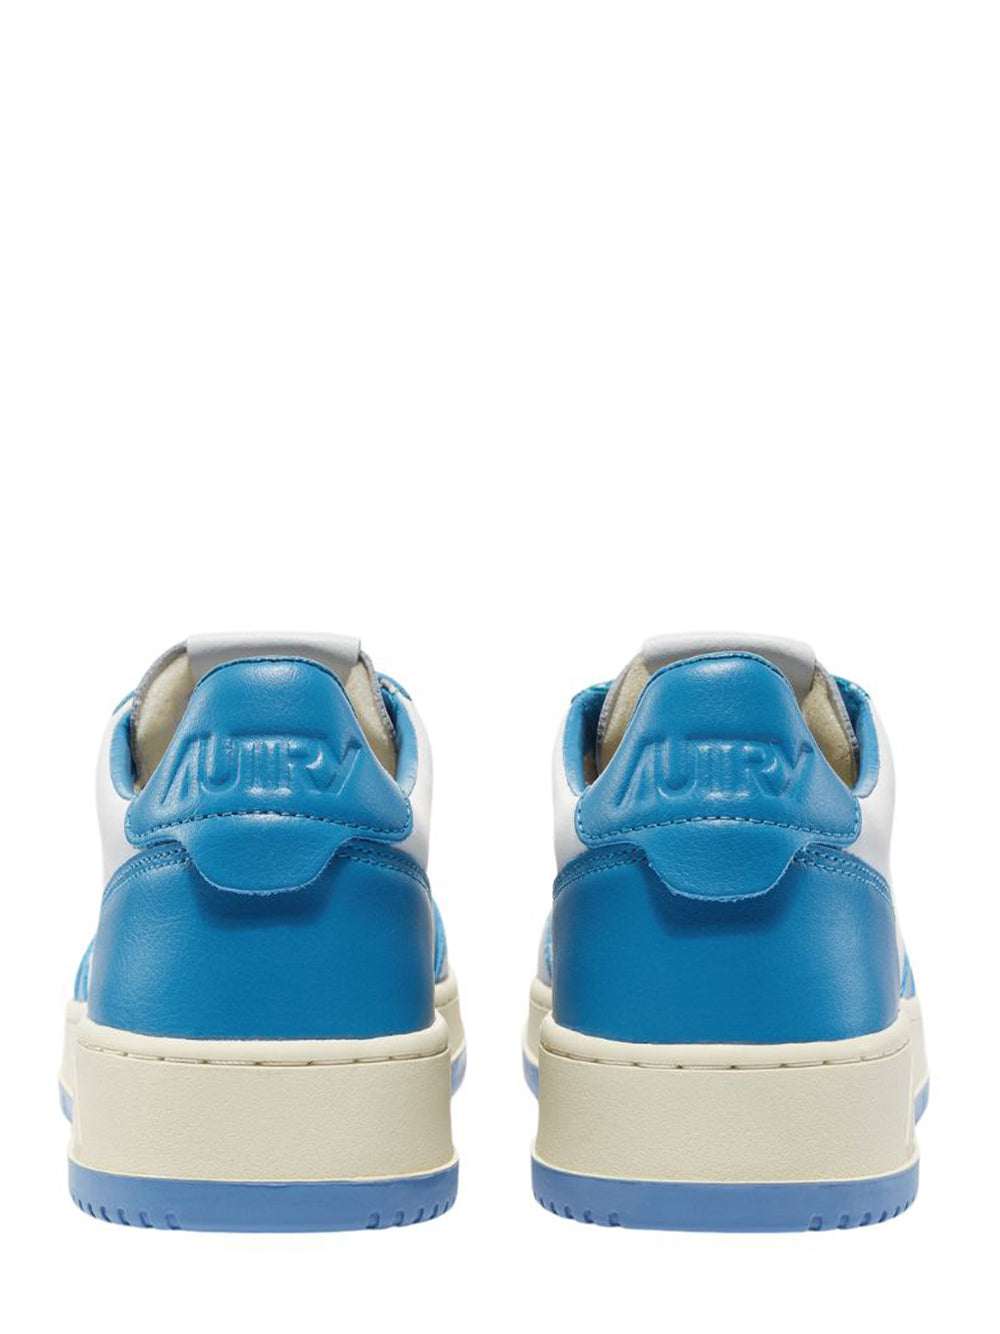 Medalist Low Sneakers In Two-Tone Leather Color (White And Azure) (Men)